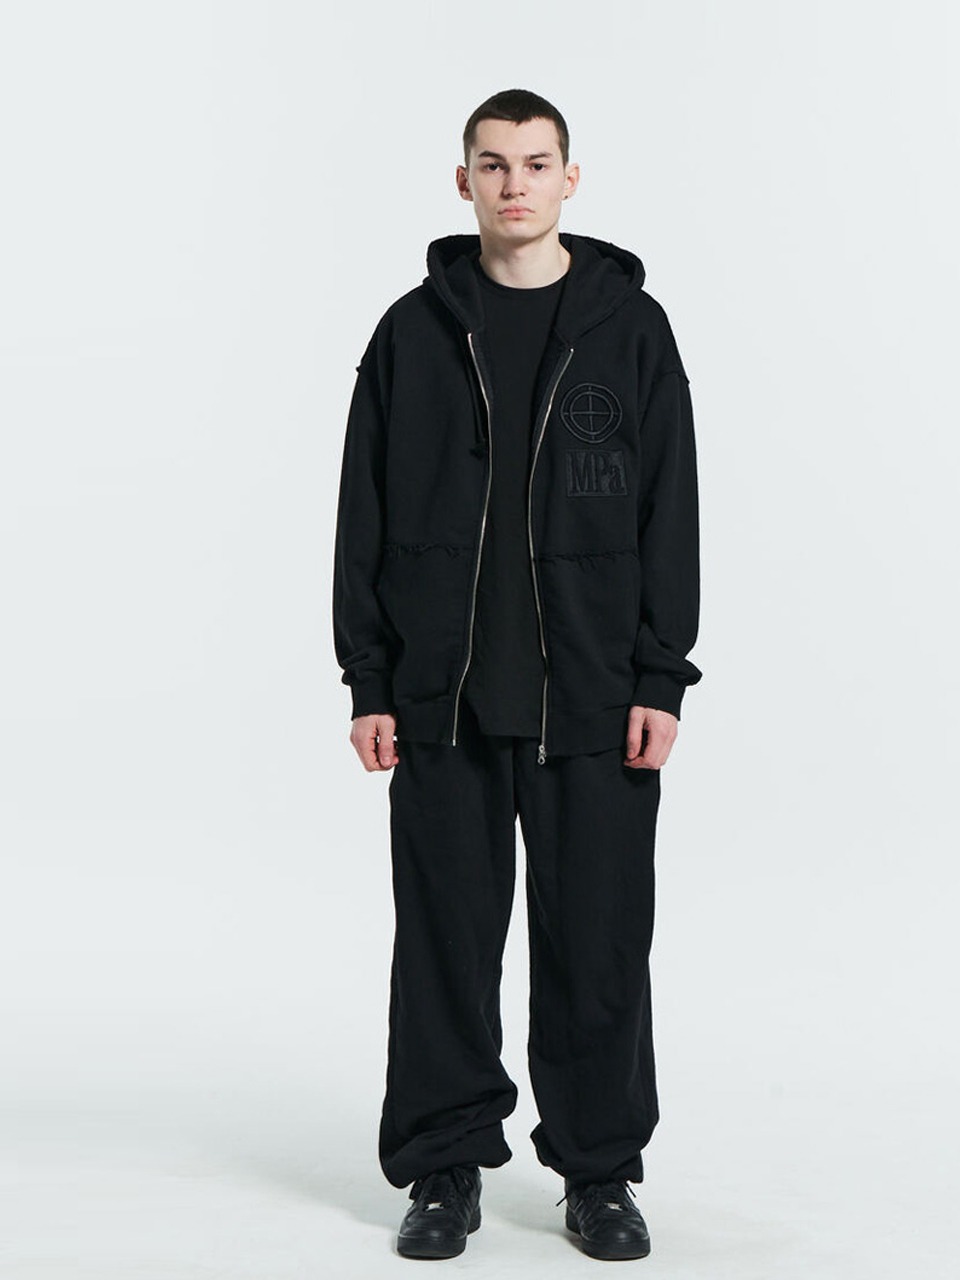 PLASTICPRODUCT - MPa SCRATCHED ZIPPED HOODIE (BLACK)